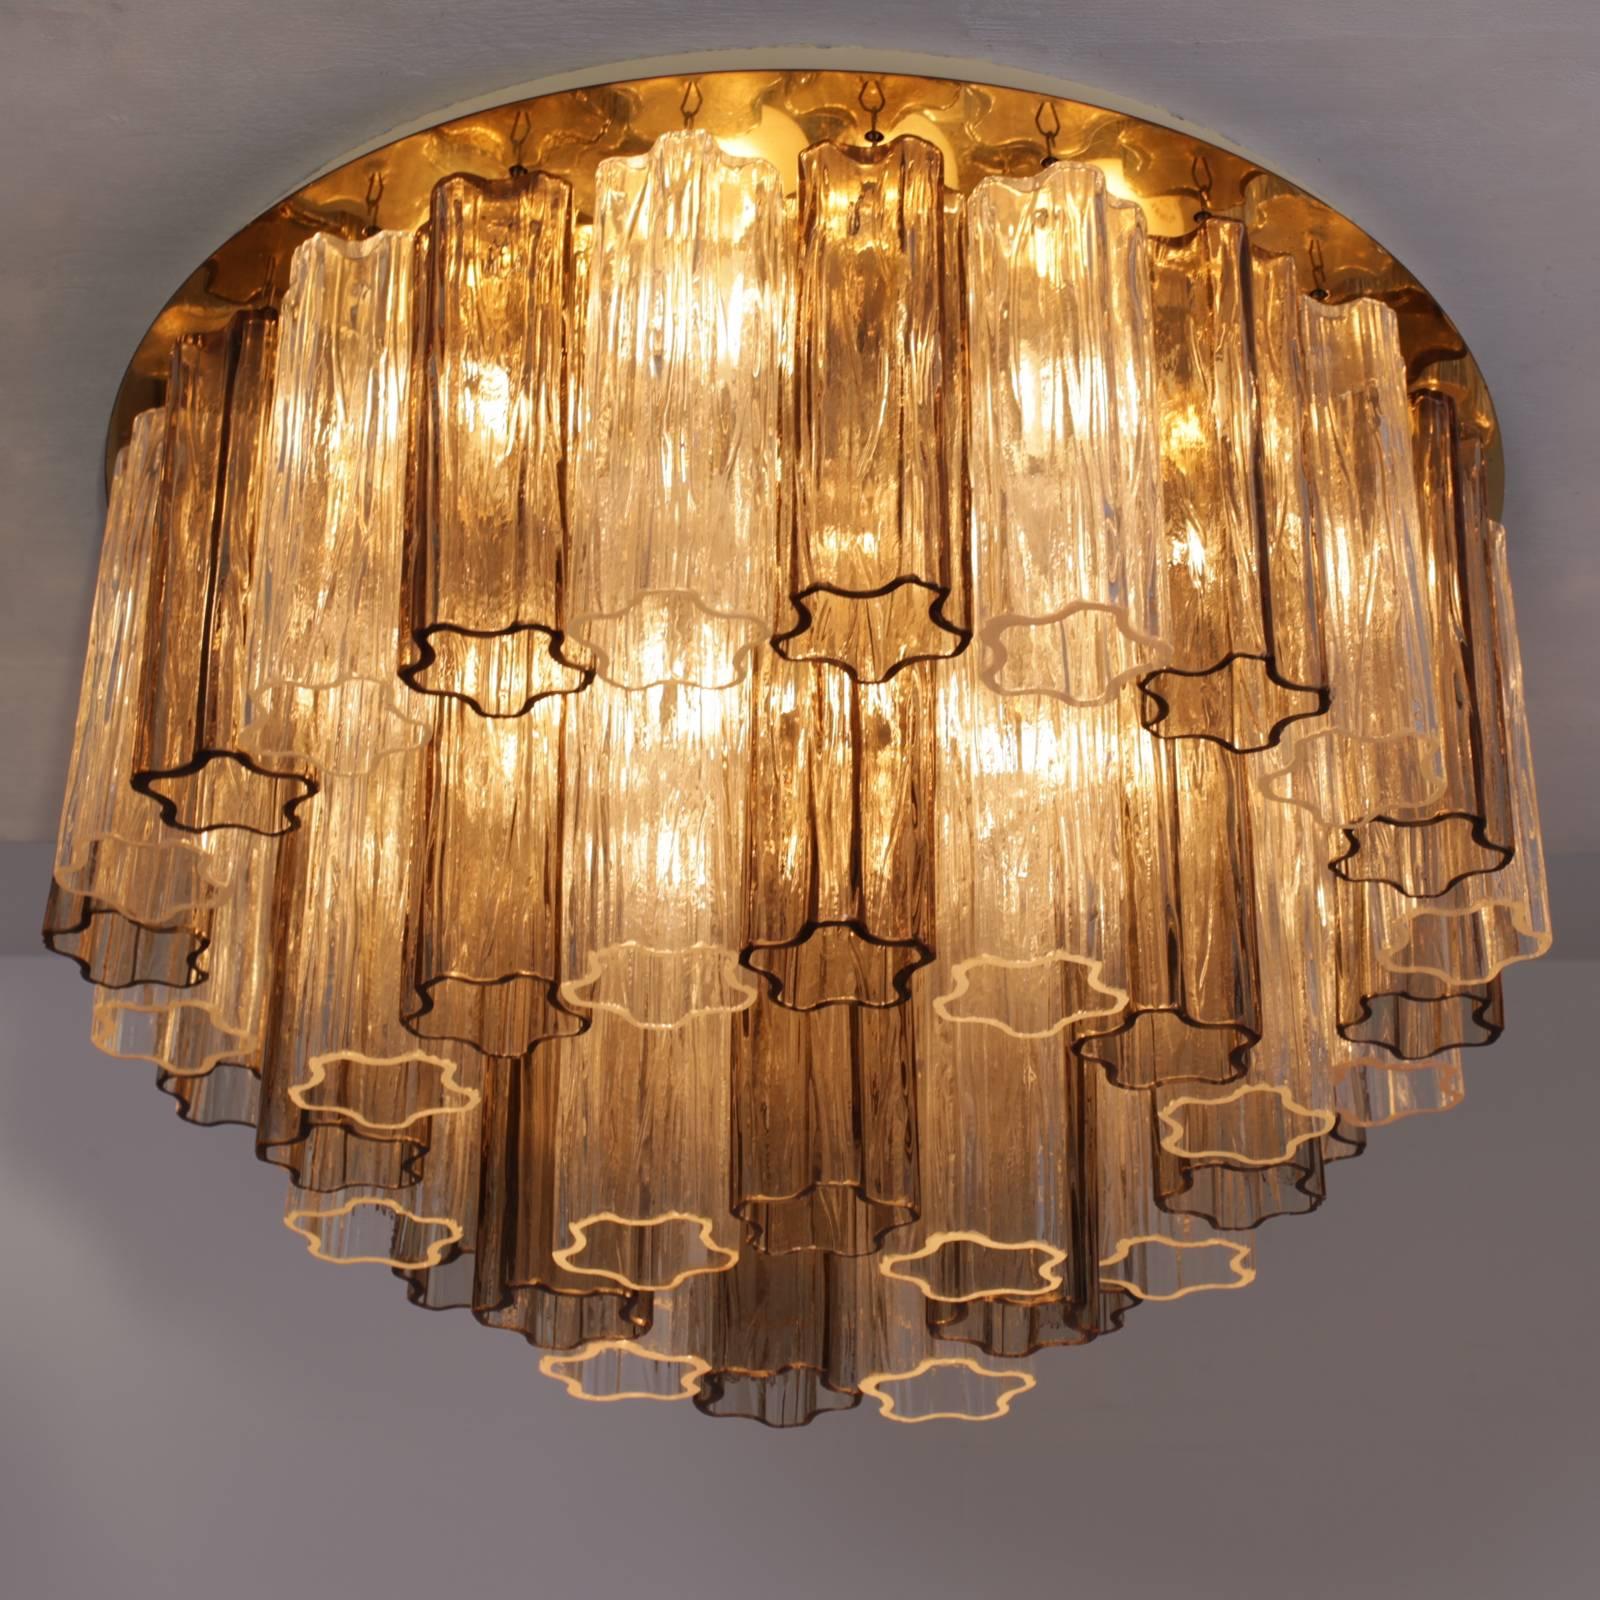 Wonderful huge, signed three-tier Murano glass tronchi flush mount or chandelier by Kalmar. The chandelier is from the 1960s and 48 hand blown Murano glasses in two colors hanging on a brass plate. The chandelier is lighted with 13 bulbs and in good